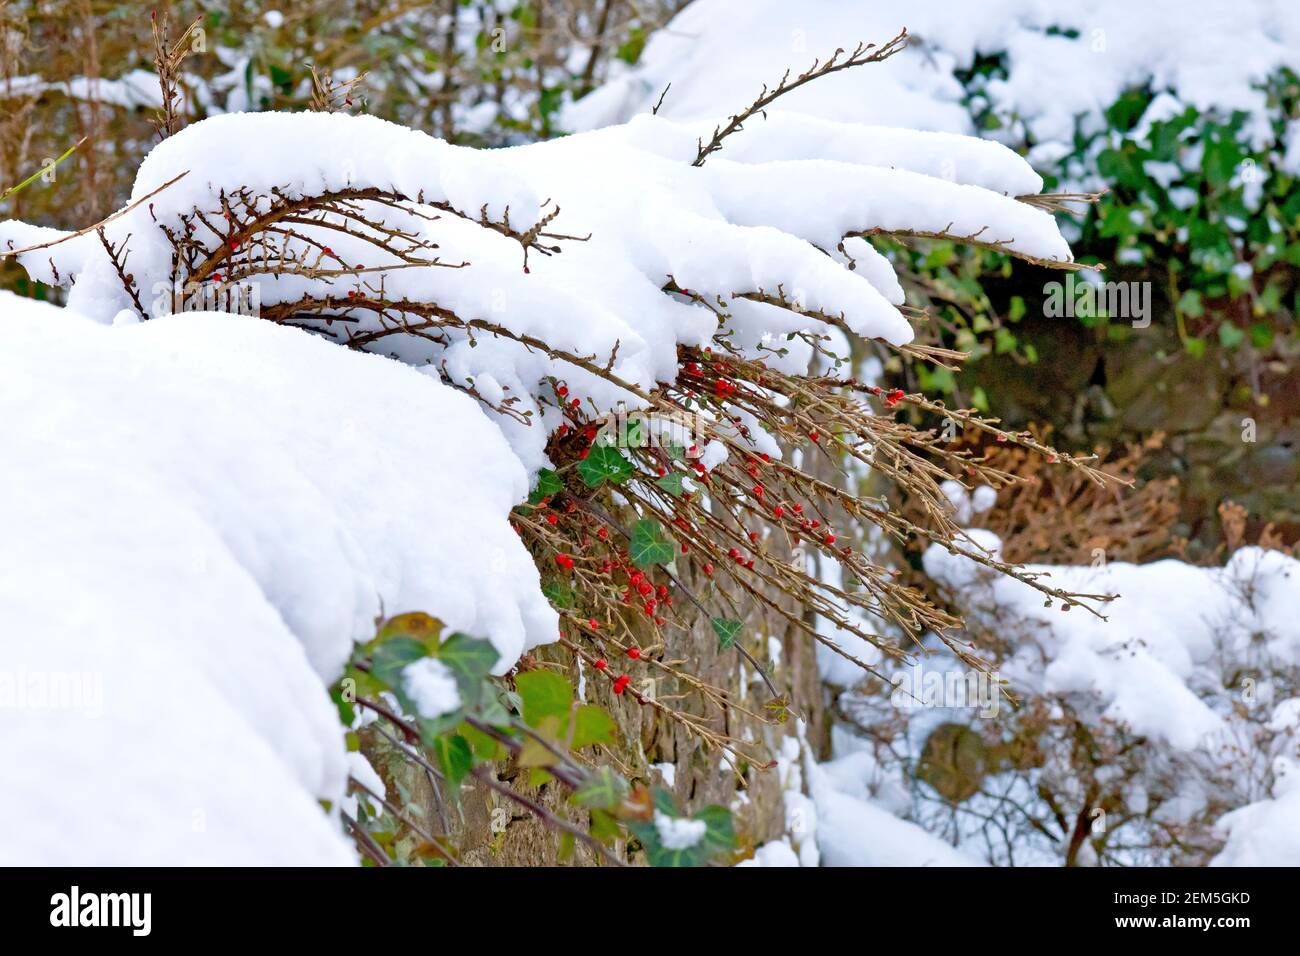 Snow covering the branches of Cotoneaster, complete with red berries, and Ivy (hedera helix) growing over a garden wall. Stock Photo